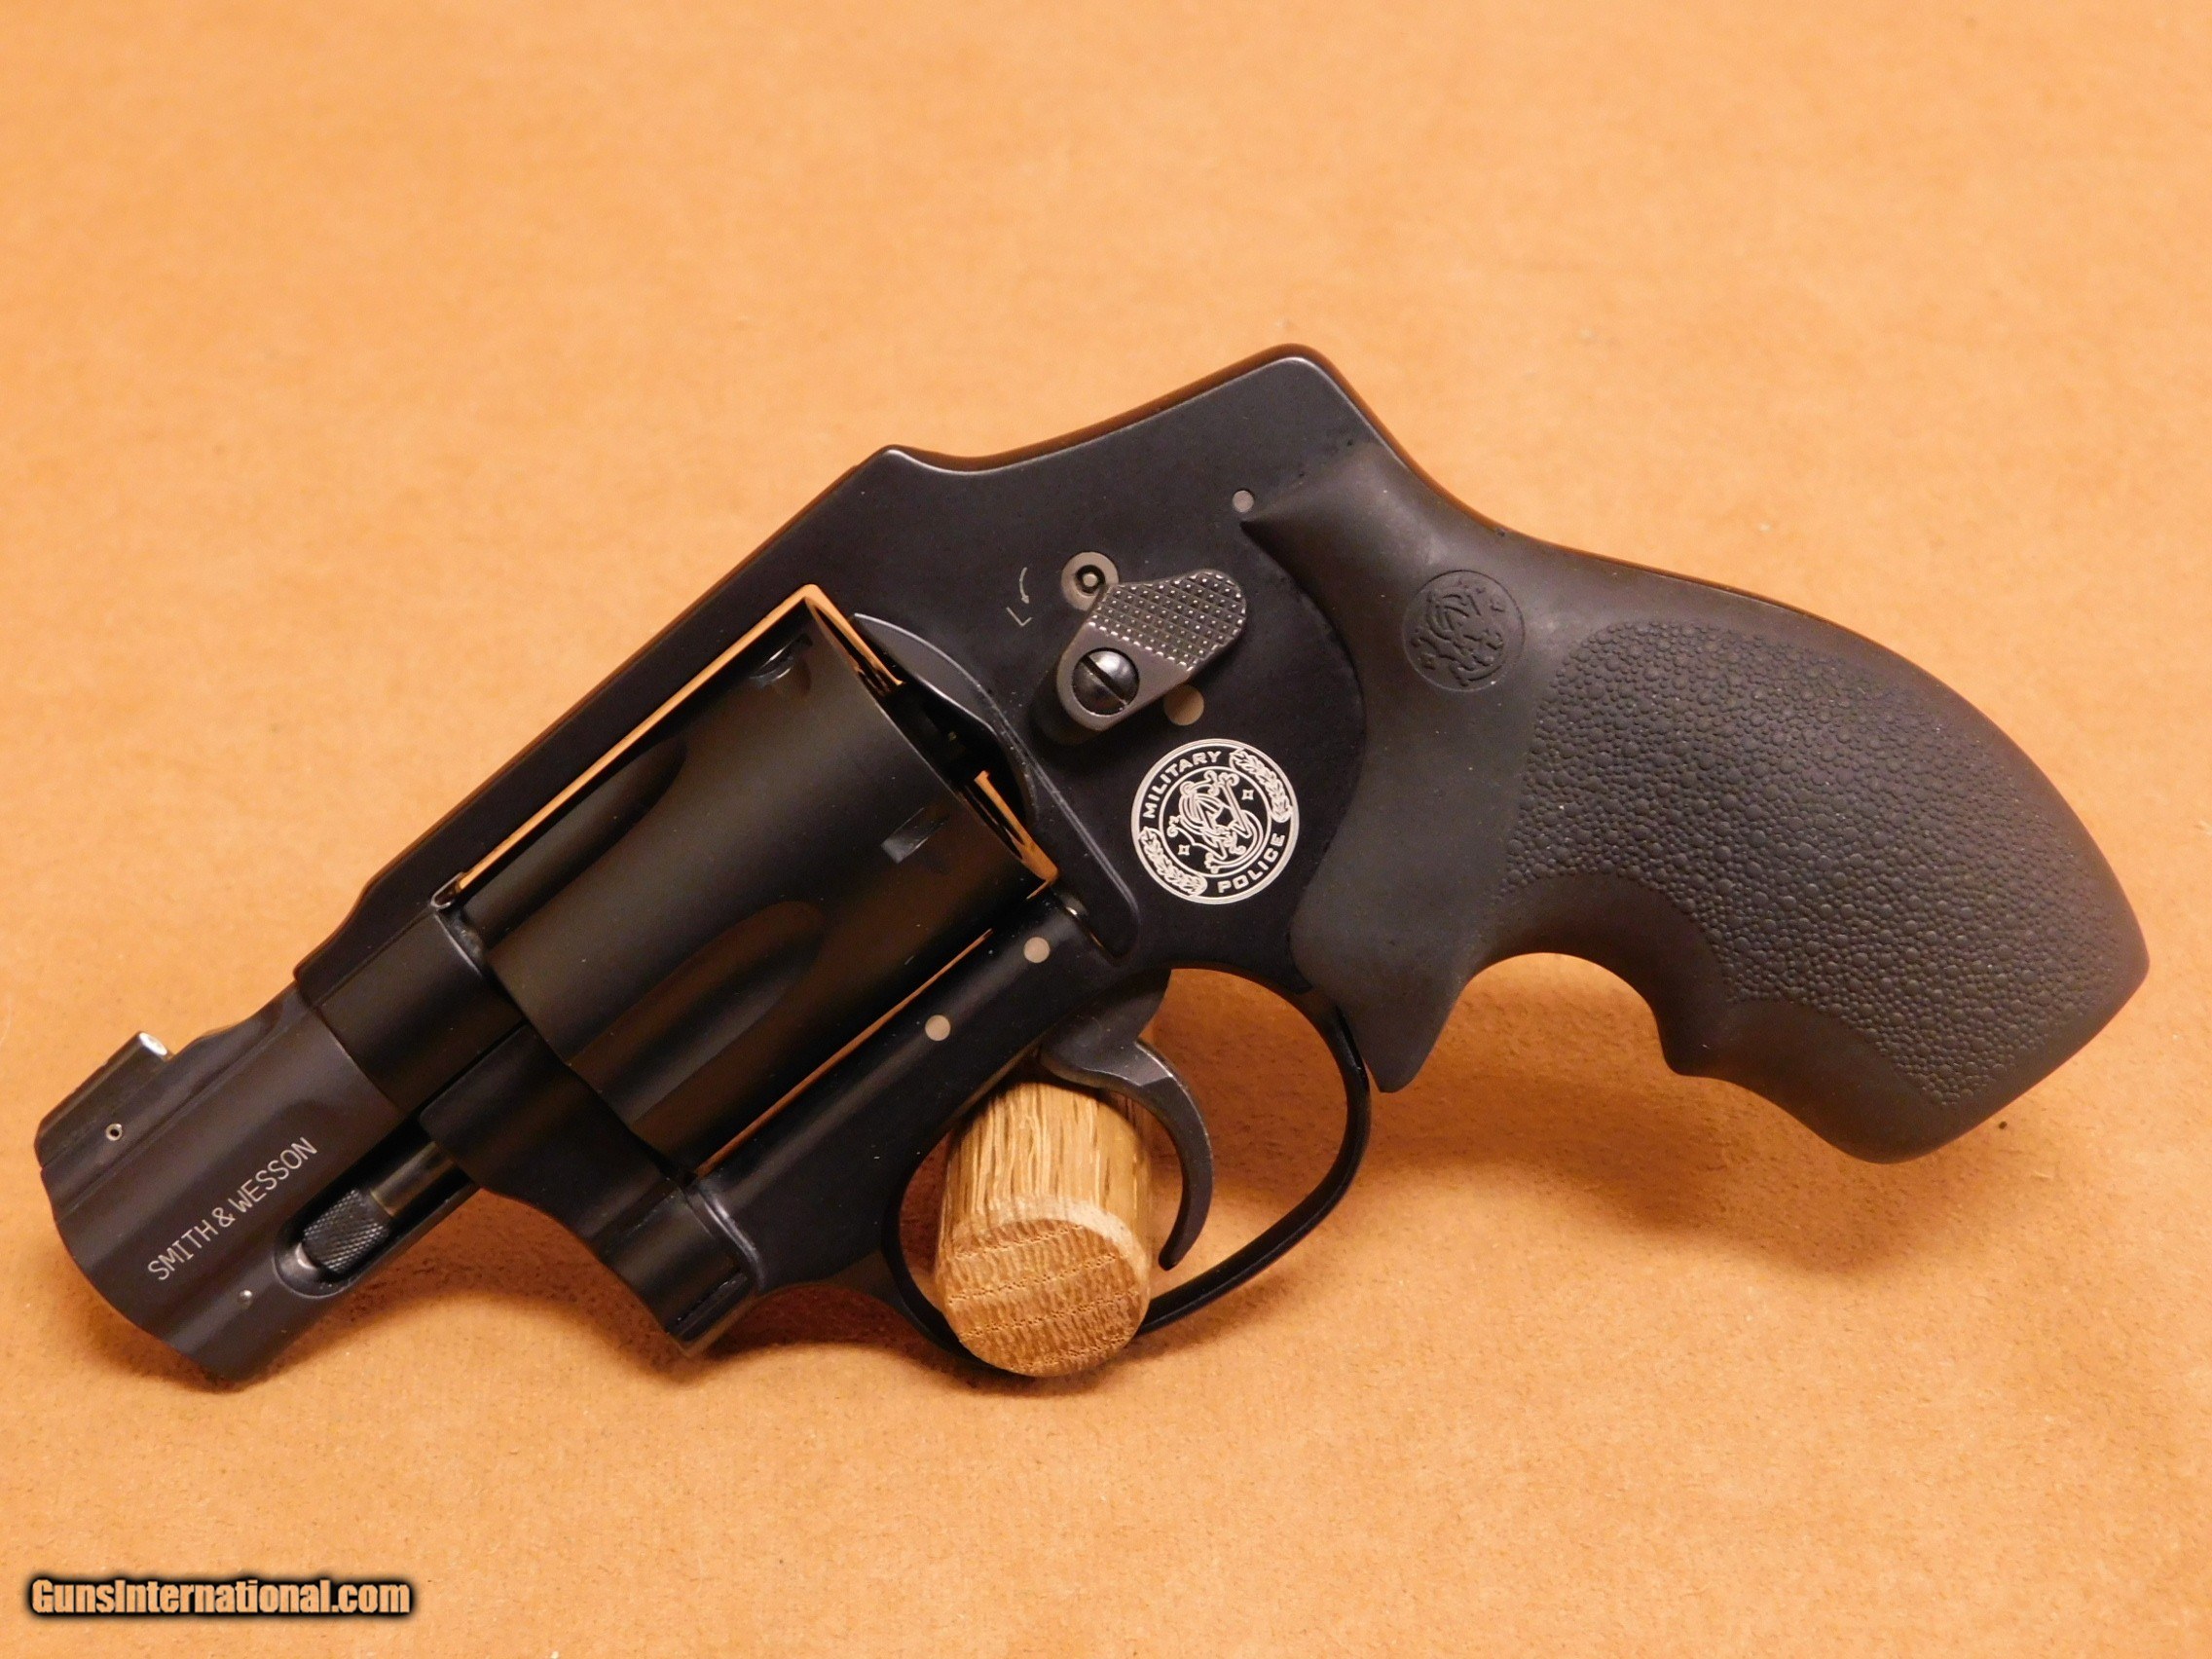 Smith-and-Wesson-Model-340-PD-and-40-J-frame-snub-nose-357-Magnumand-41_101352042_64542_363423C421F1543F.JPG